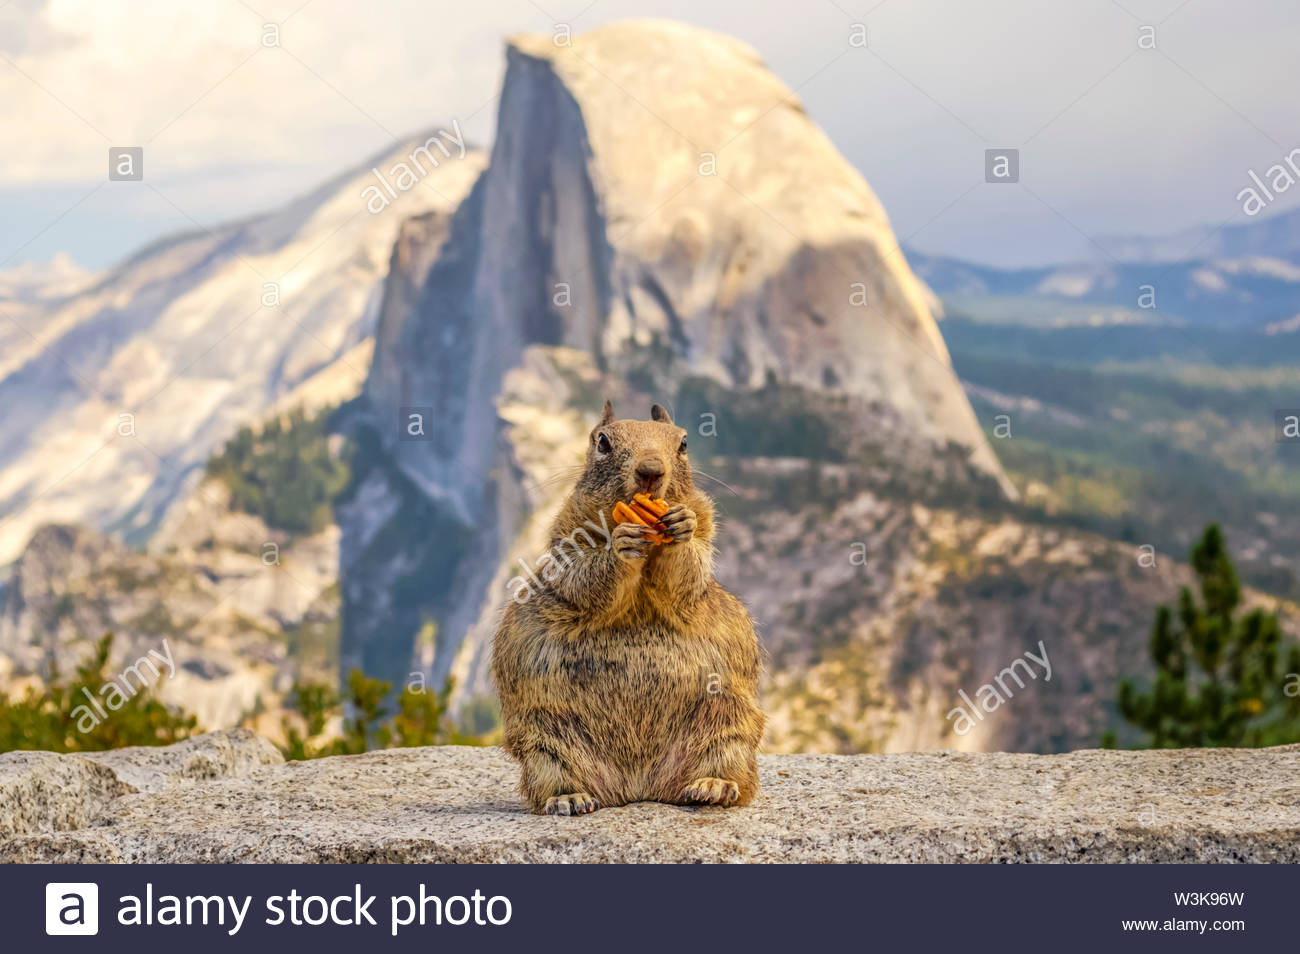 Squirrel Eating A Nut With Half Dome In The Background Yosemite